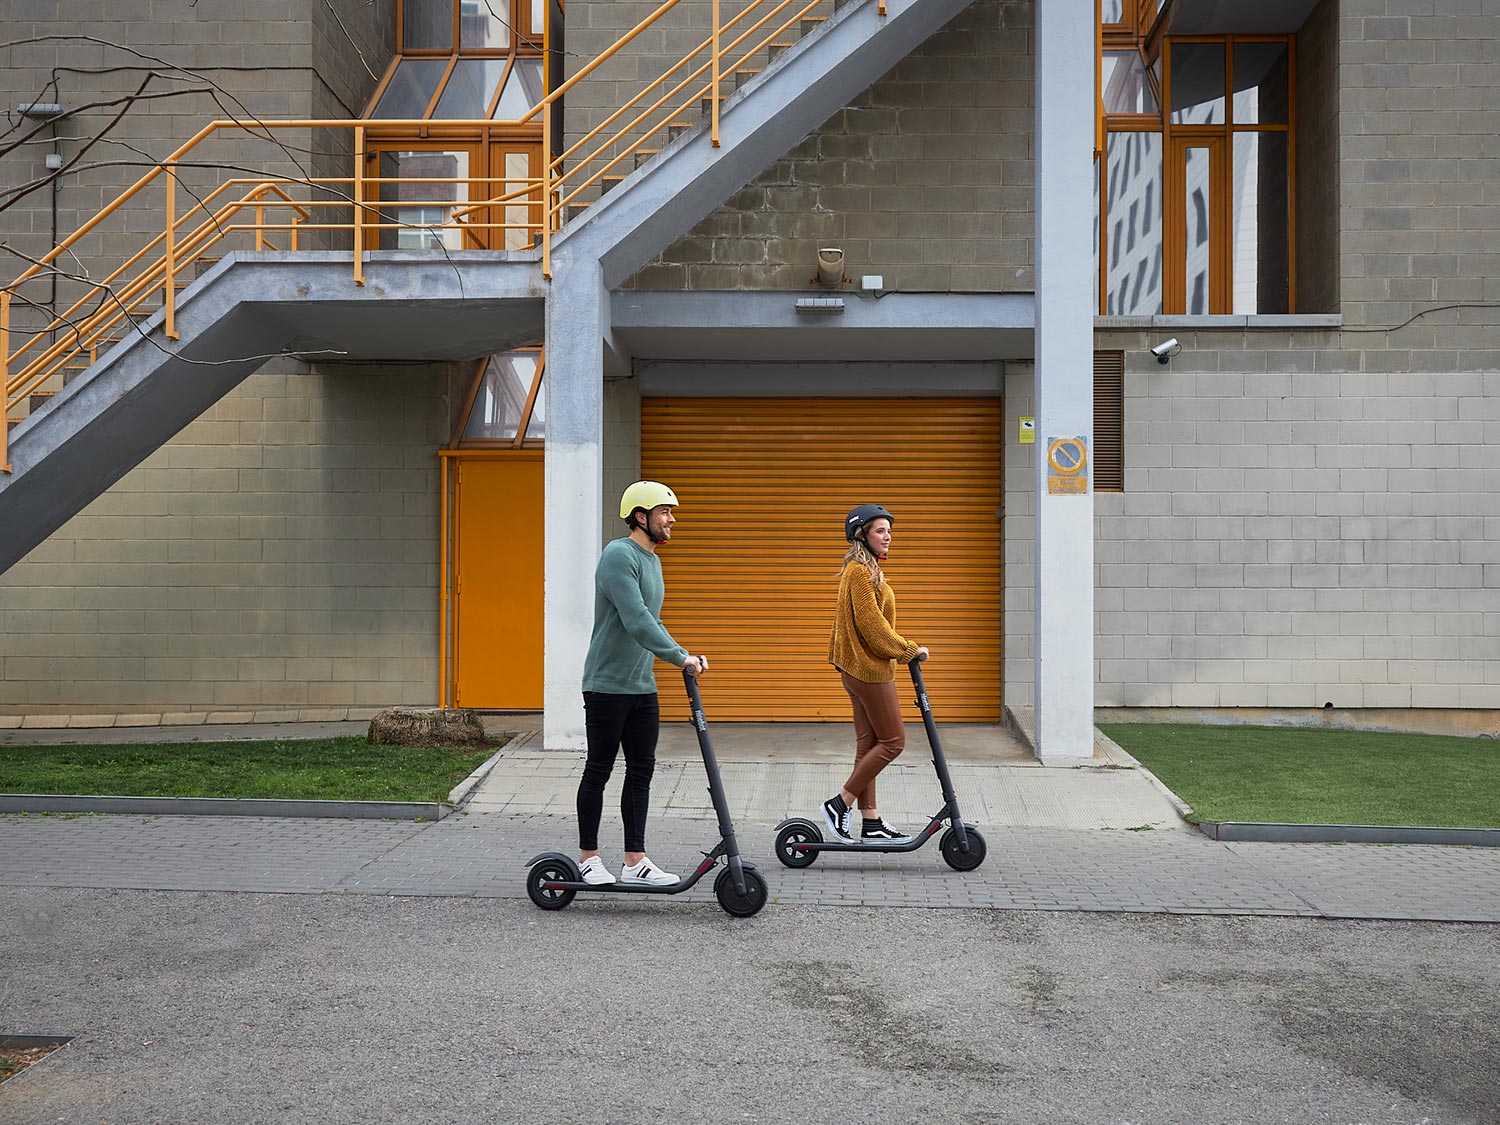 man and a woman riding a Segway Ninebot scooter